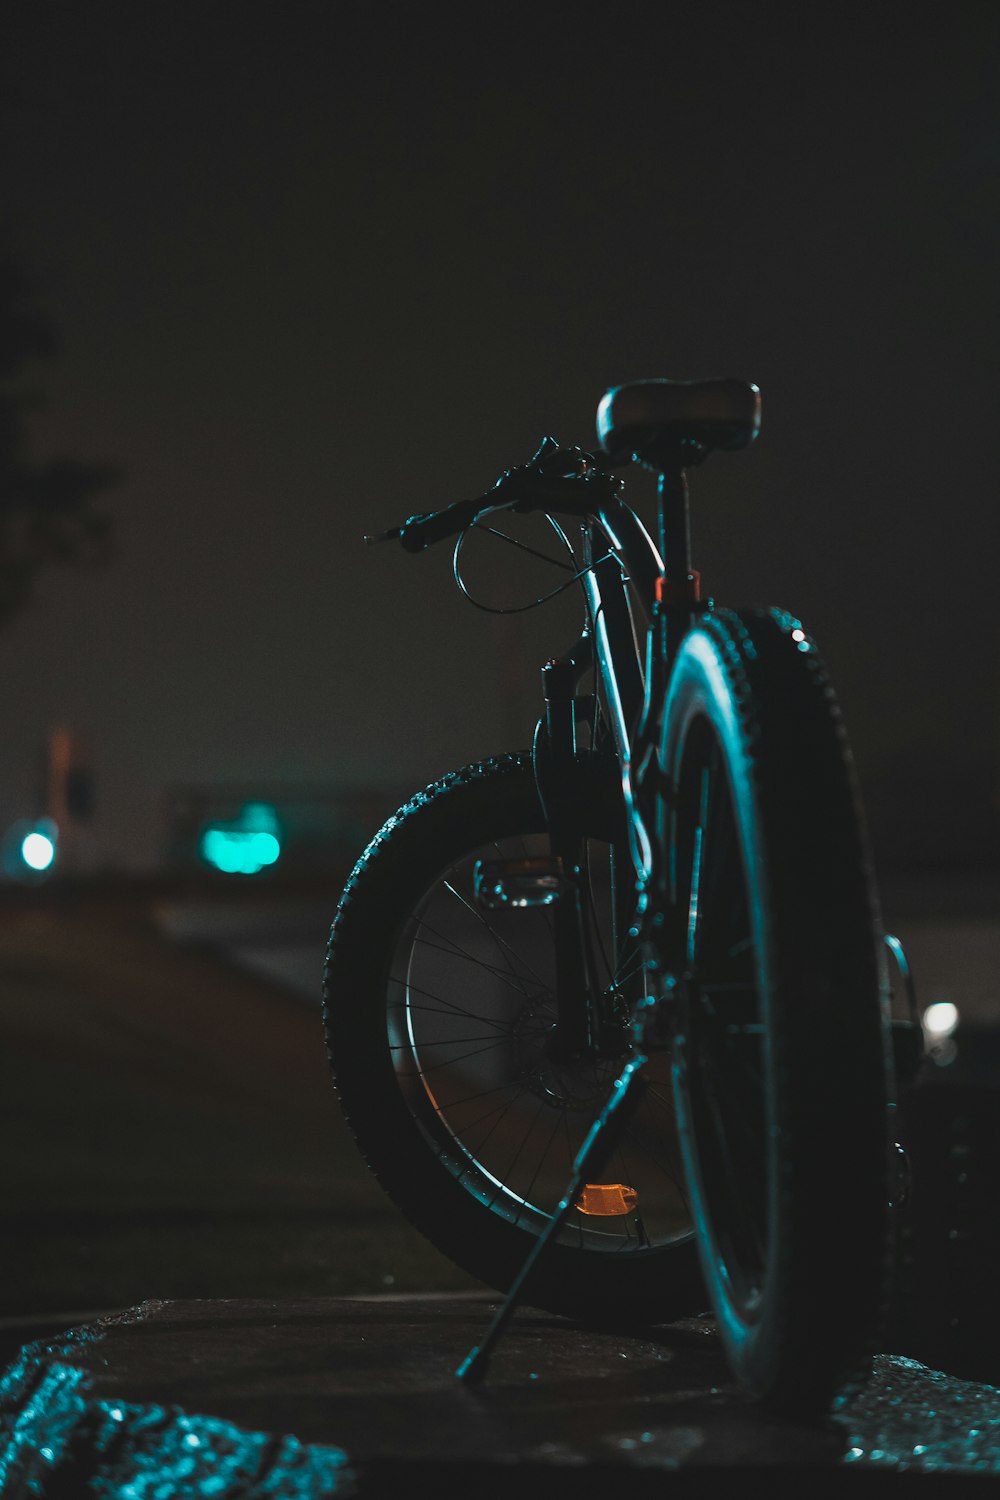 a bicycle parked on the side of a road at night